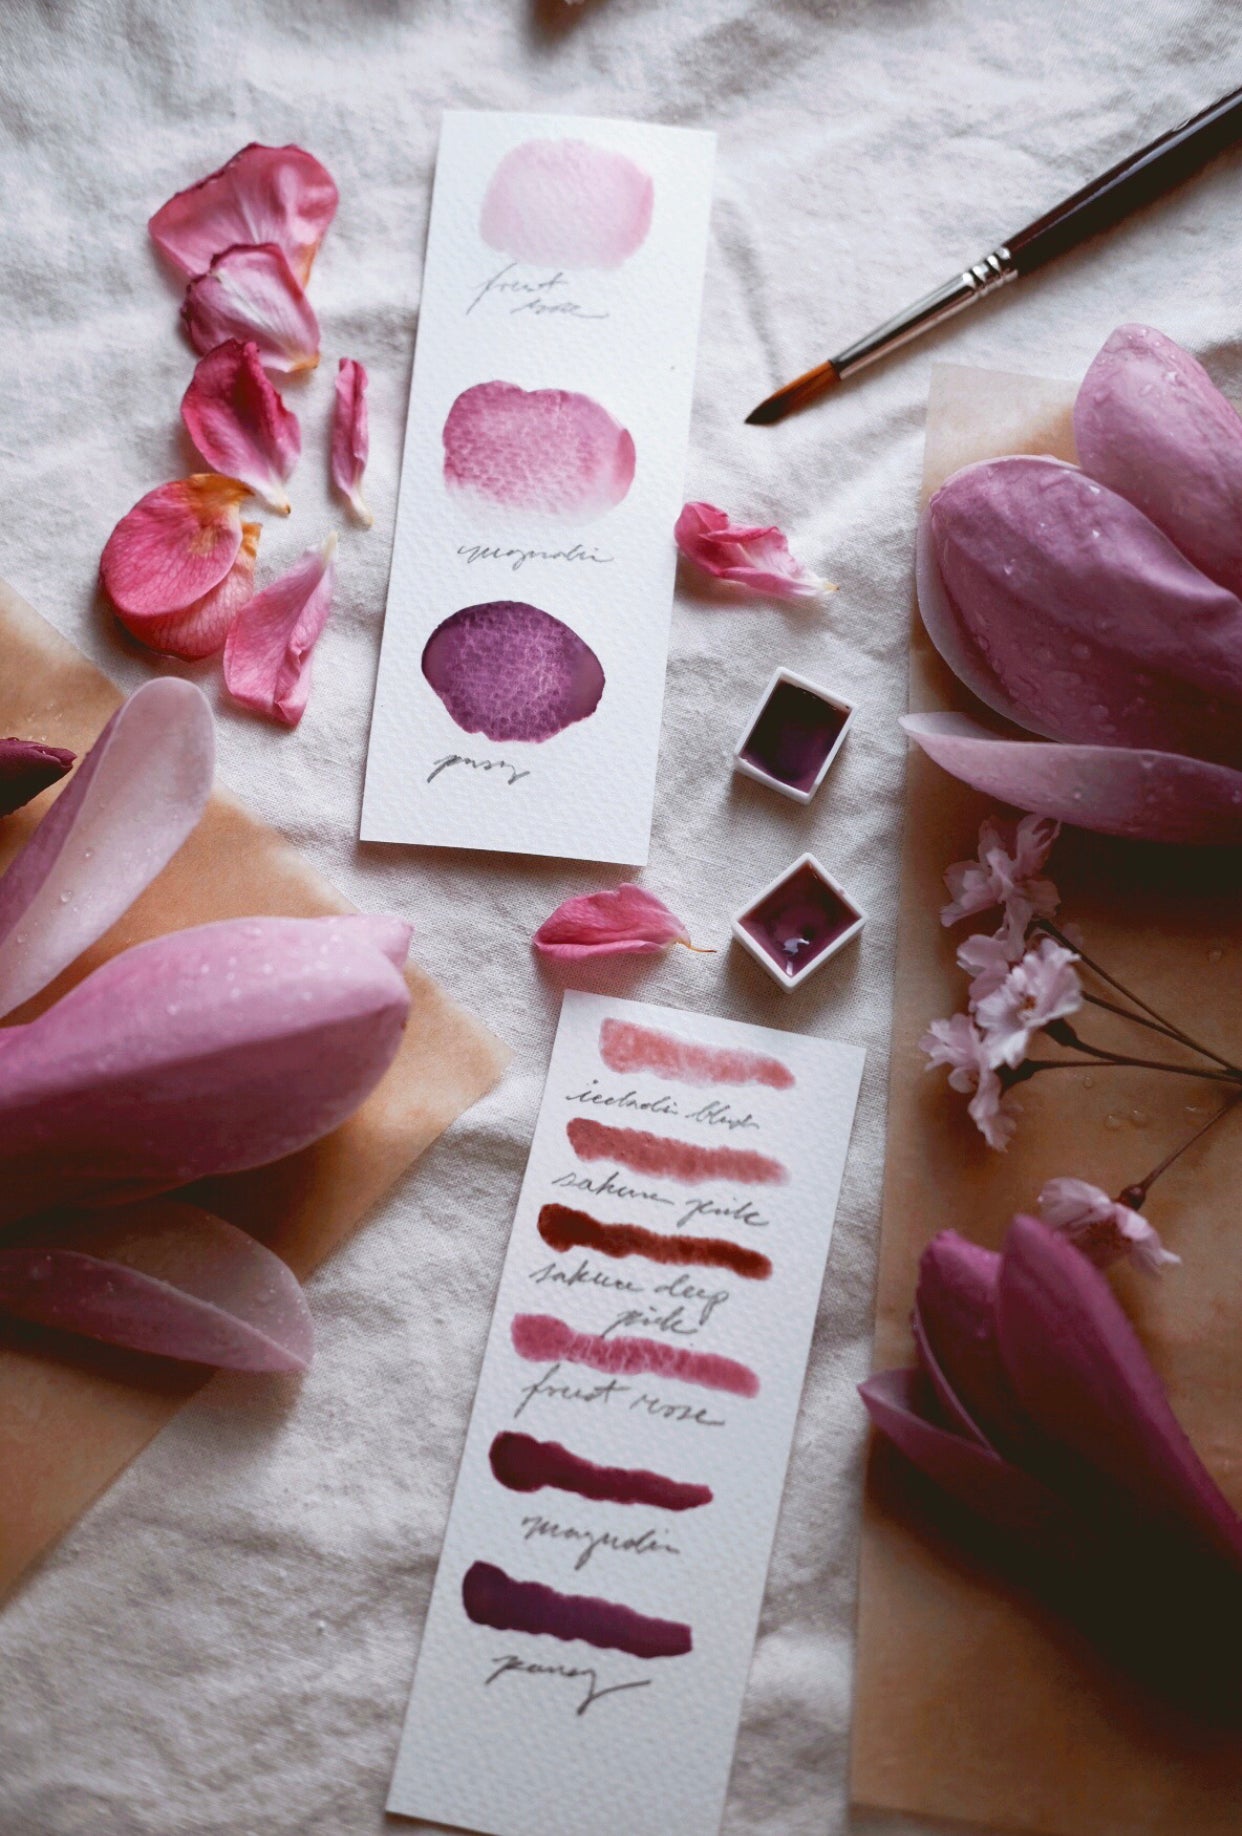 RESERVE for Kim +  Pink Blossom + Limited edition gemstone watercolor palette